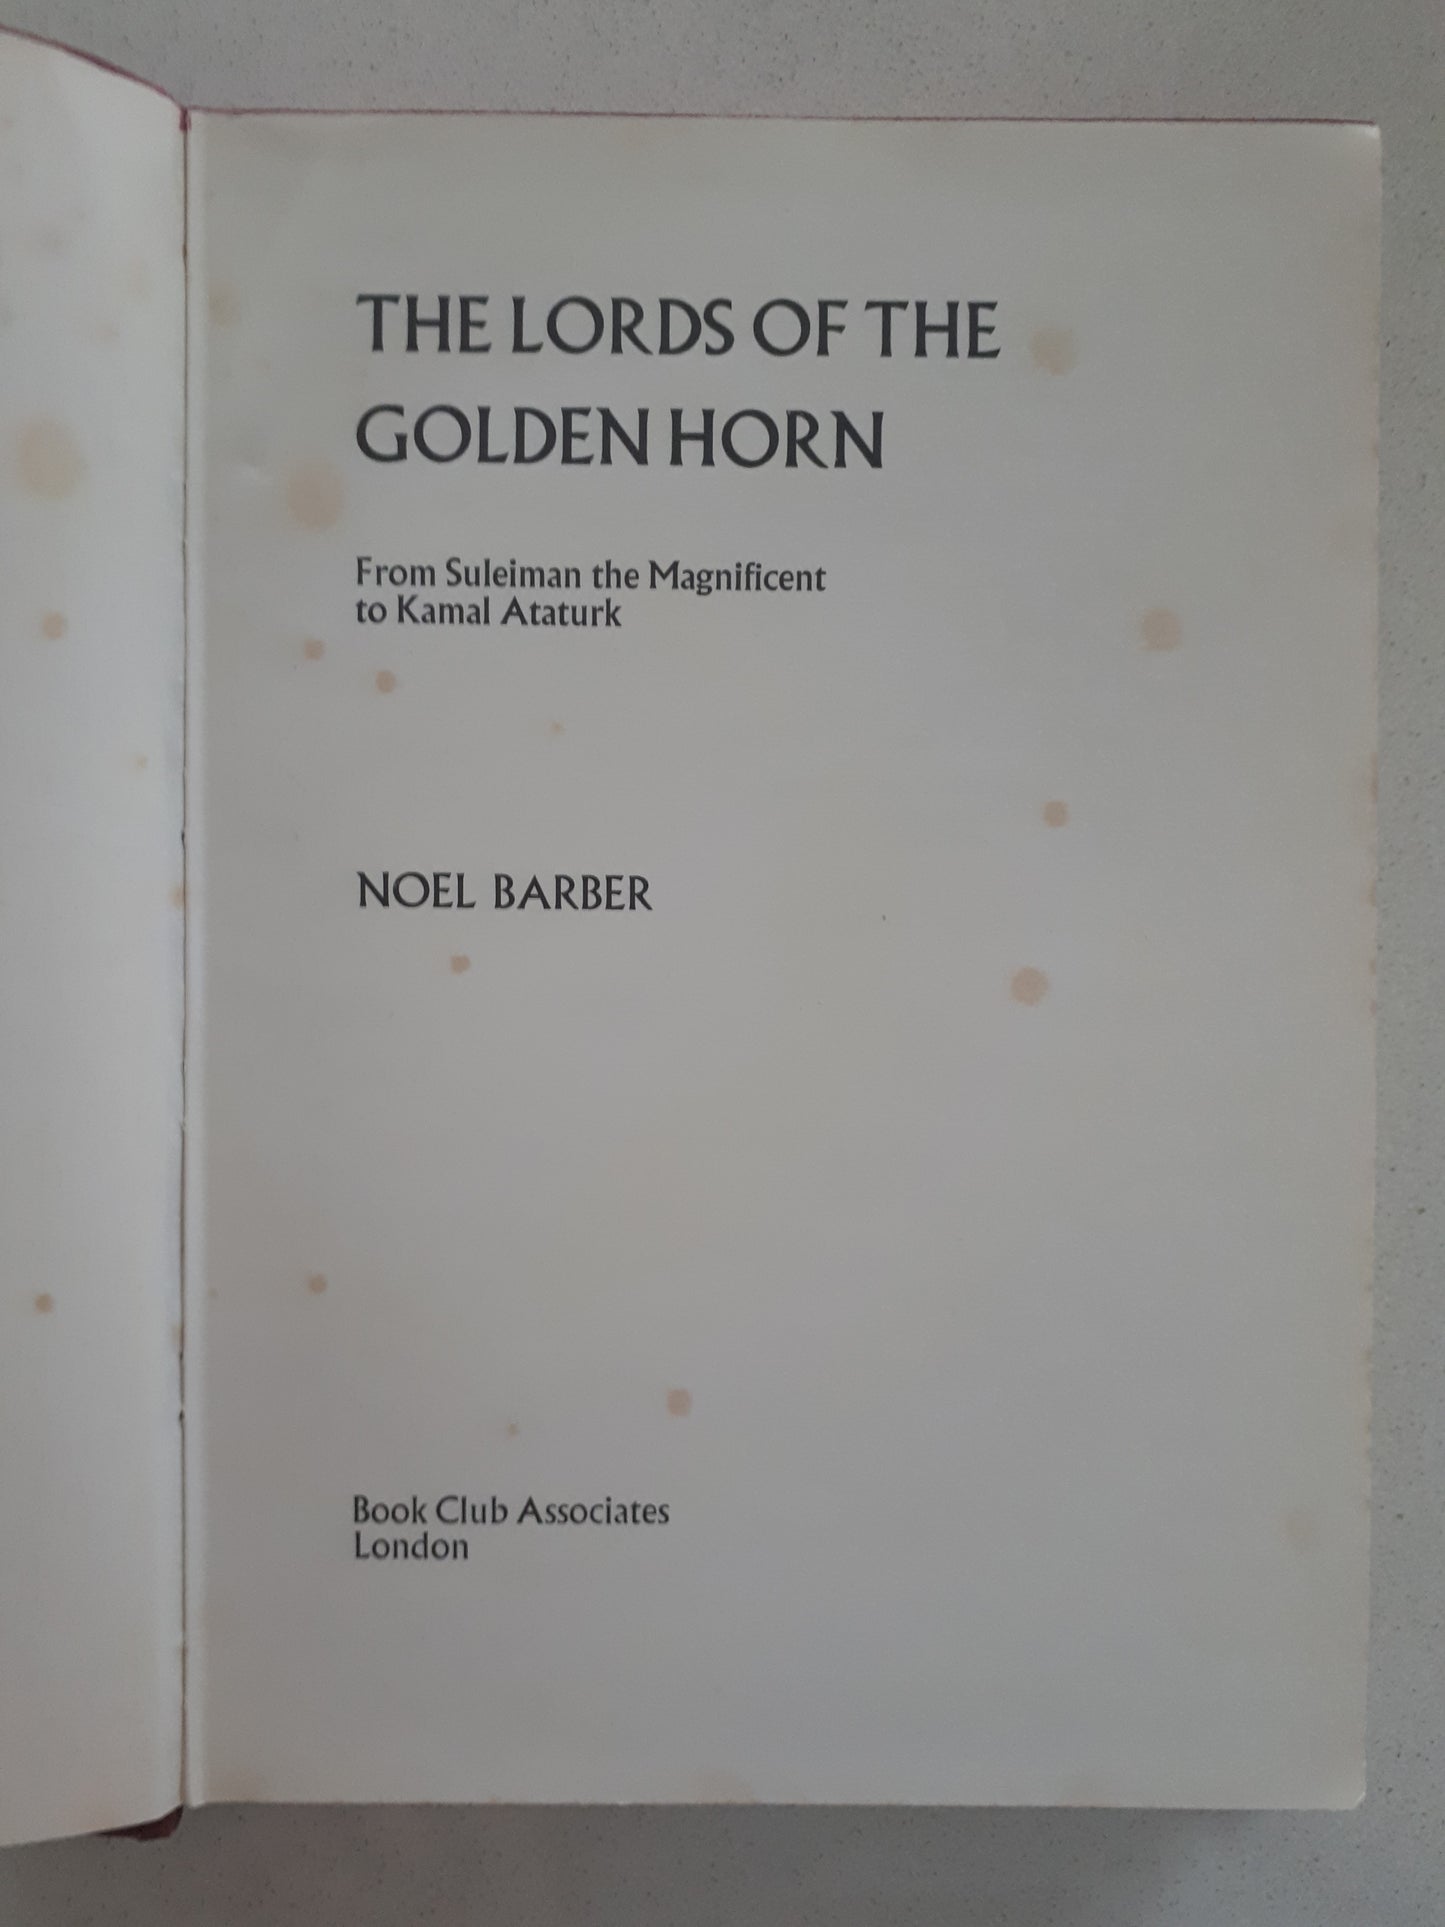 Lords of The Golden Horn by Noel Barber